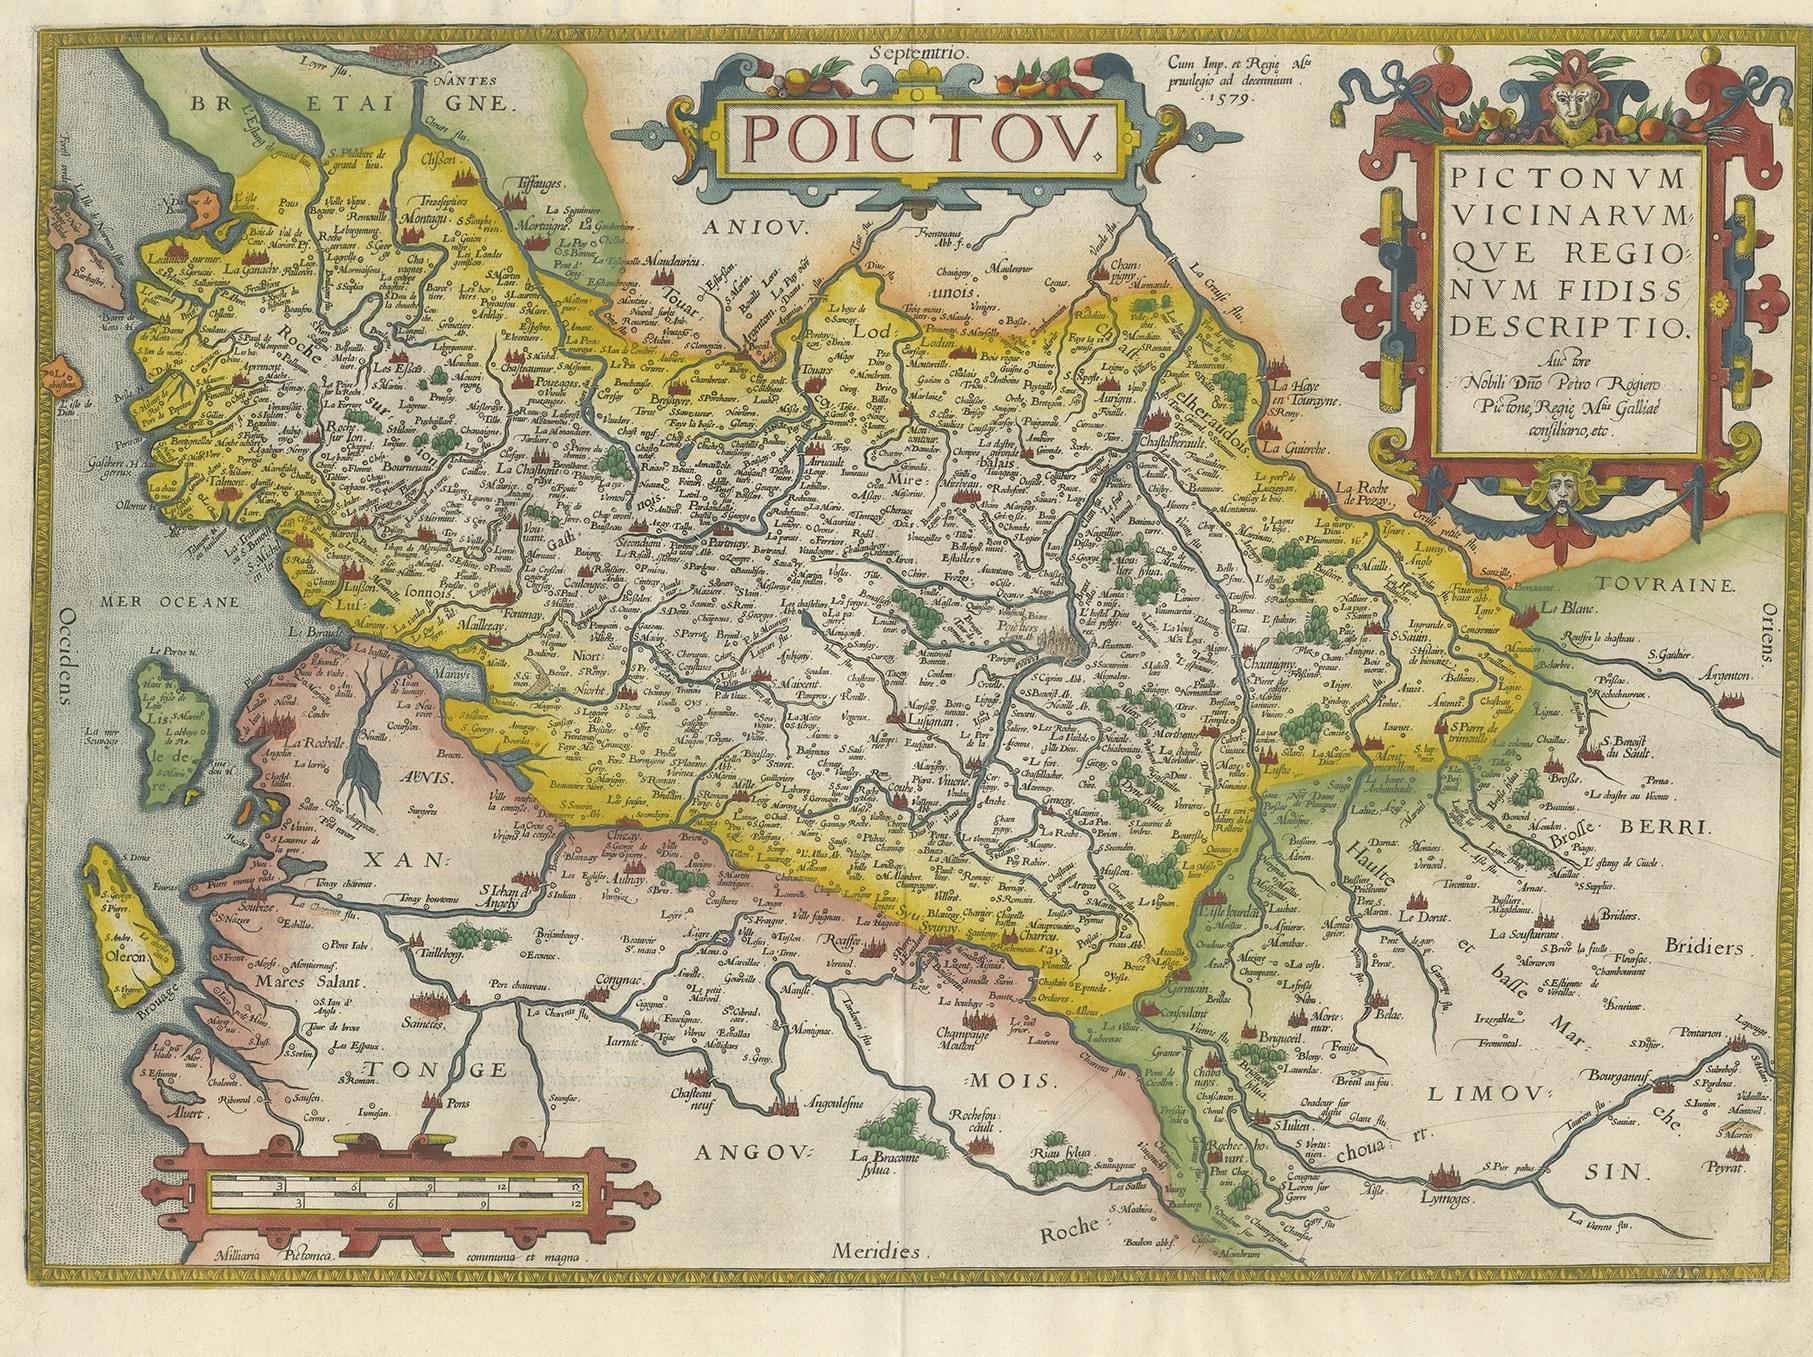 Antique map titled 'Poictou'. Original antique map of the region of Poitou, a former province of west-central France whose capital city was Poitiers. Published by A. Ortelius, circa 1600.